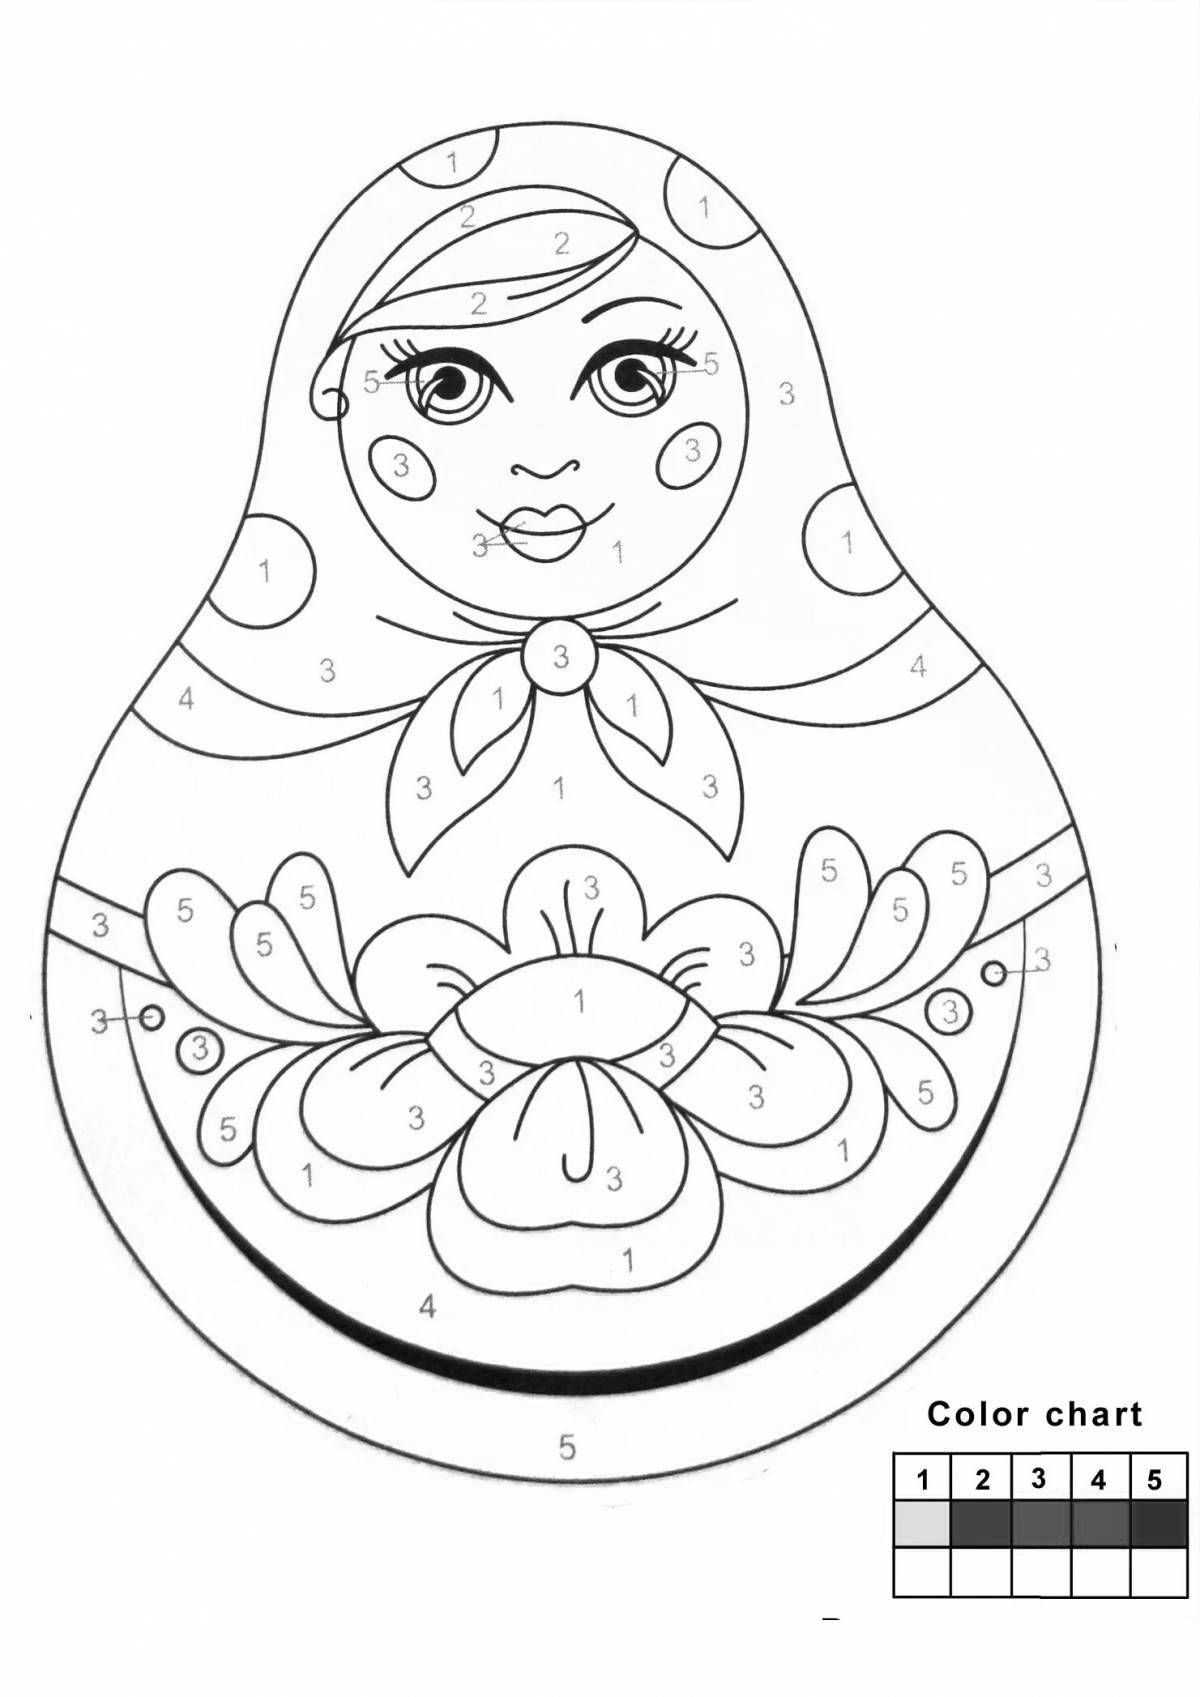 Amazing nesting dolls coloring by numbers